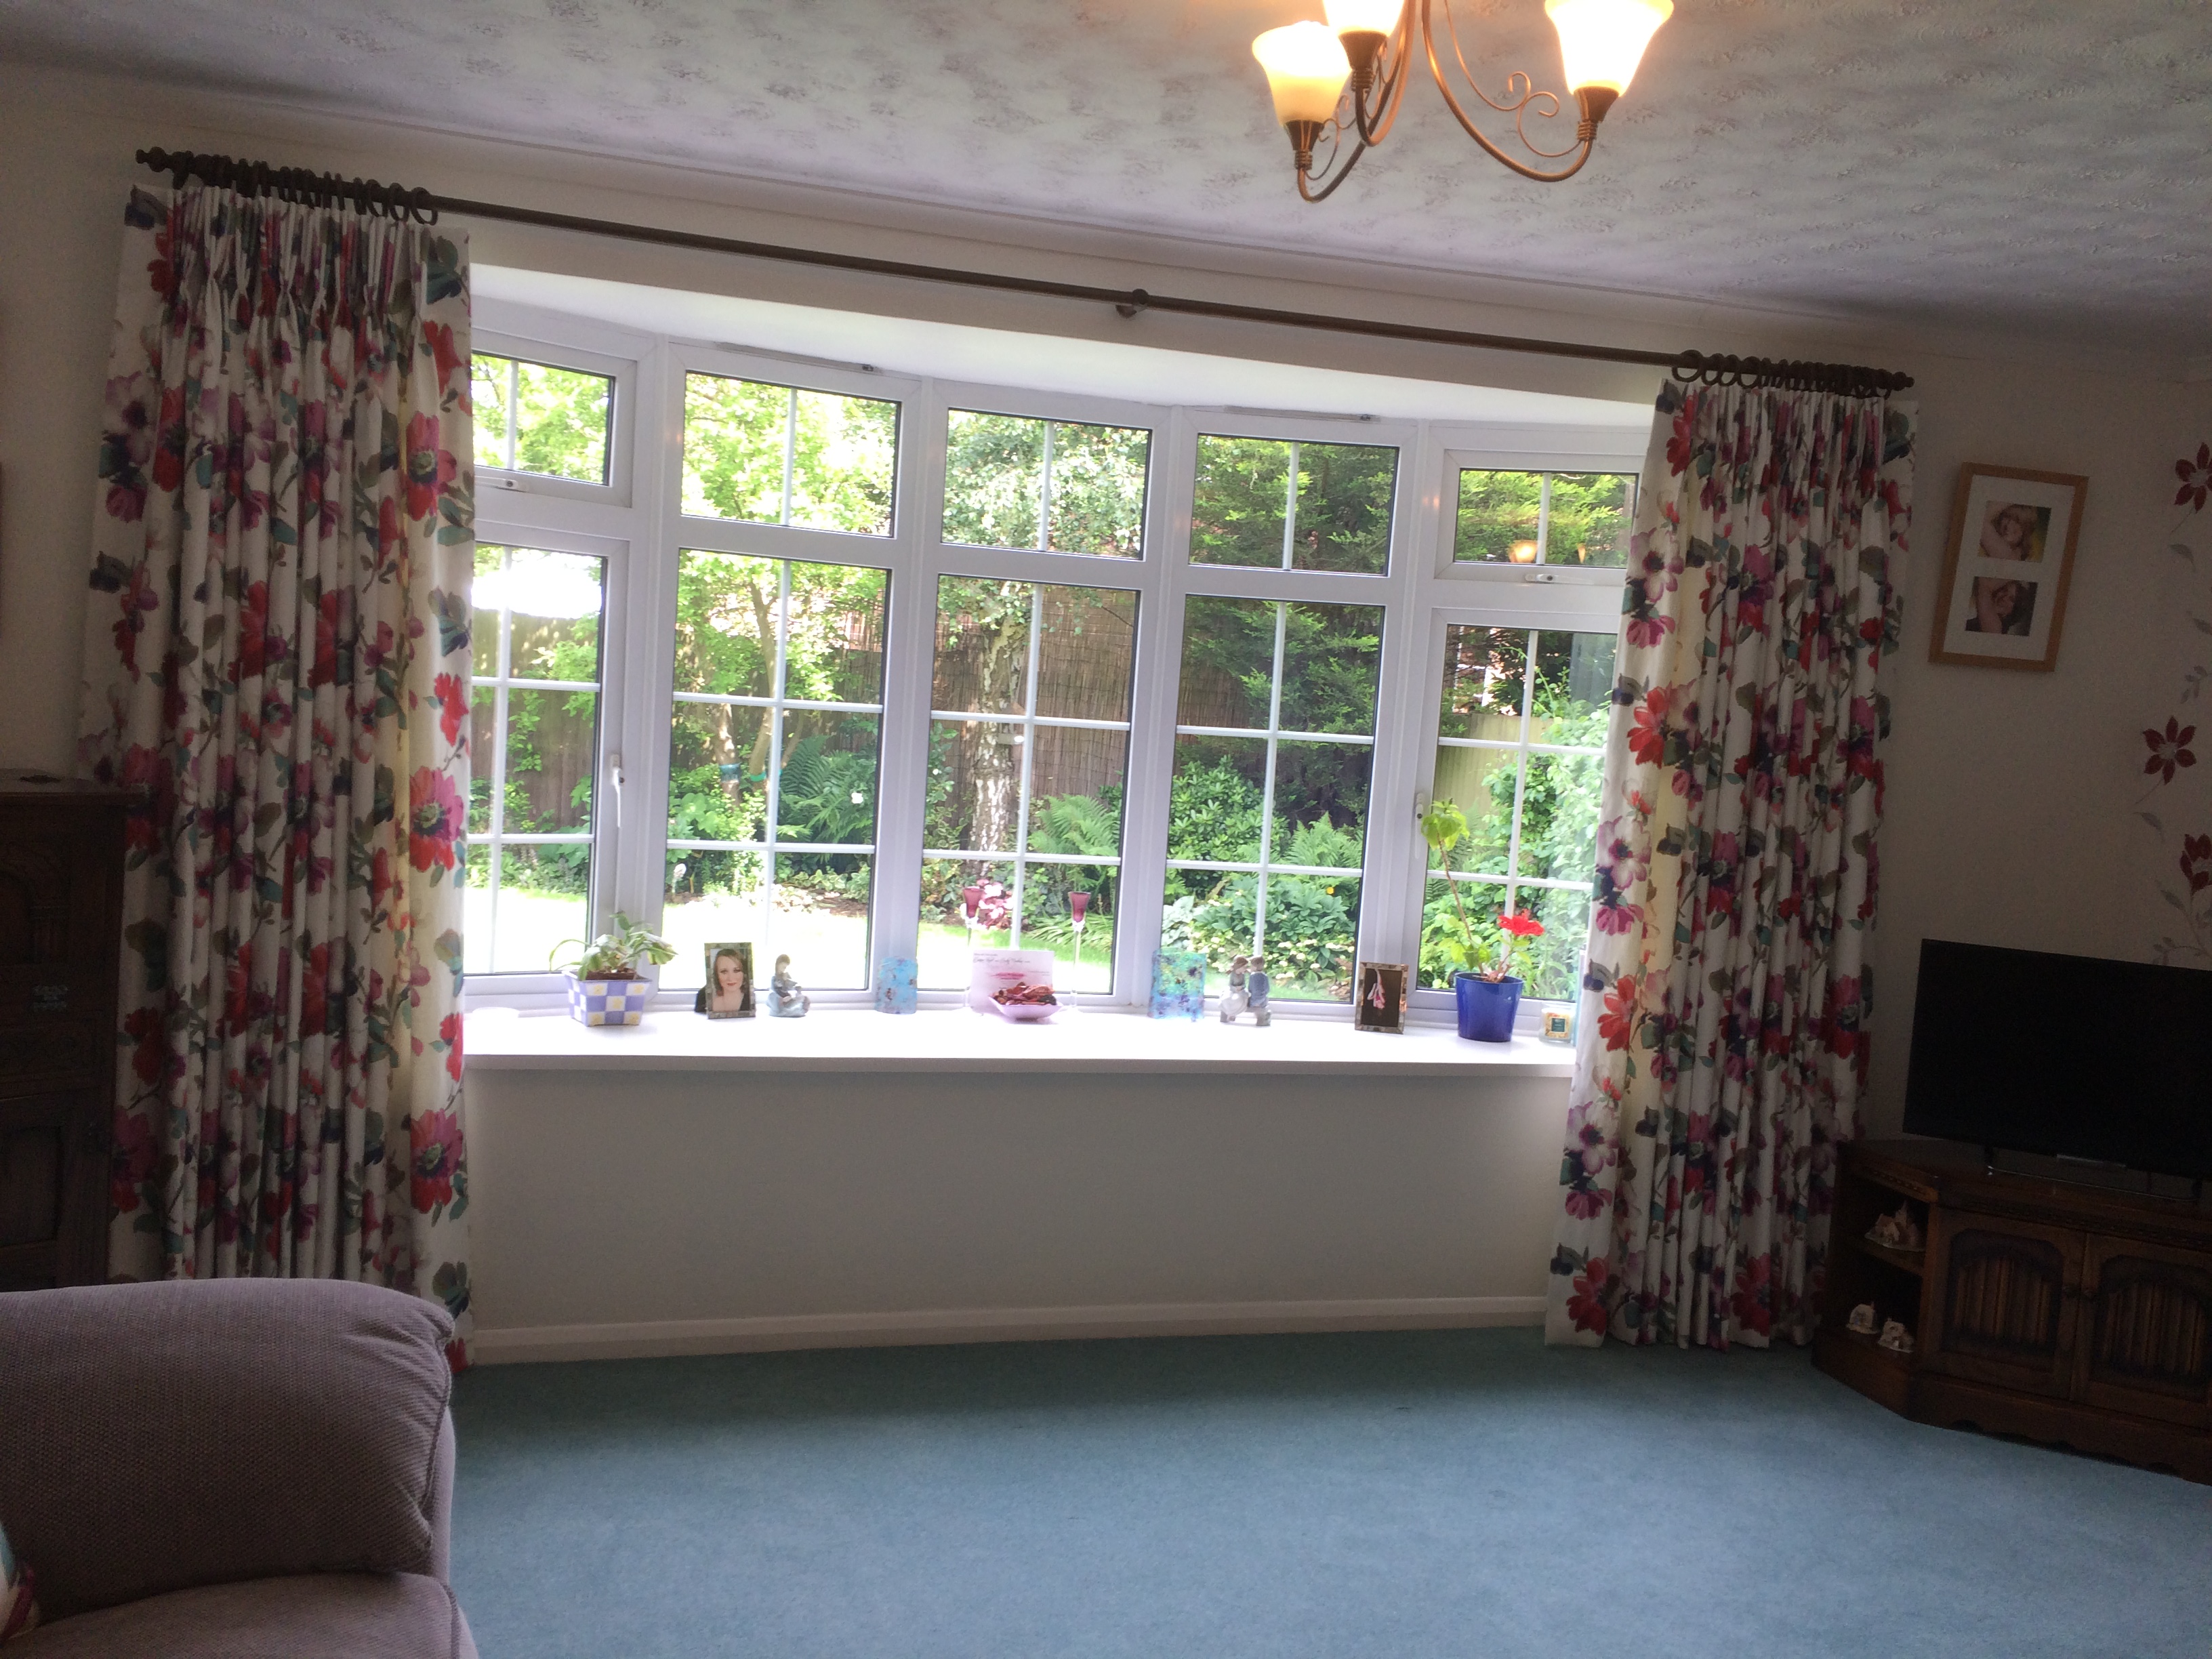 Bay window and curtains